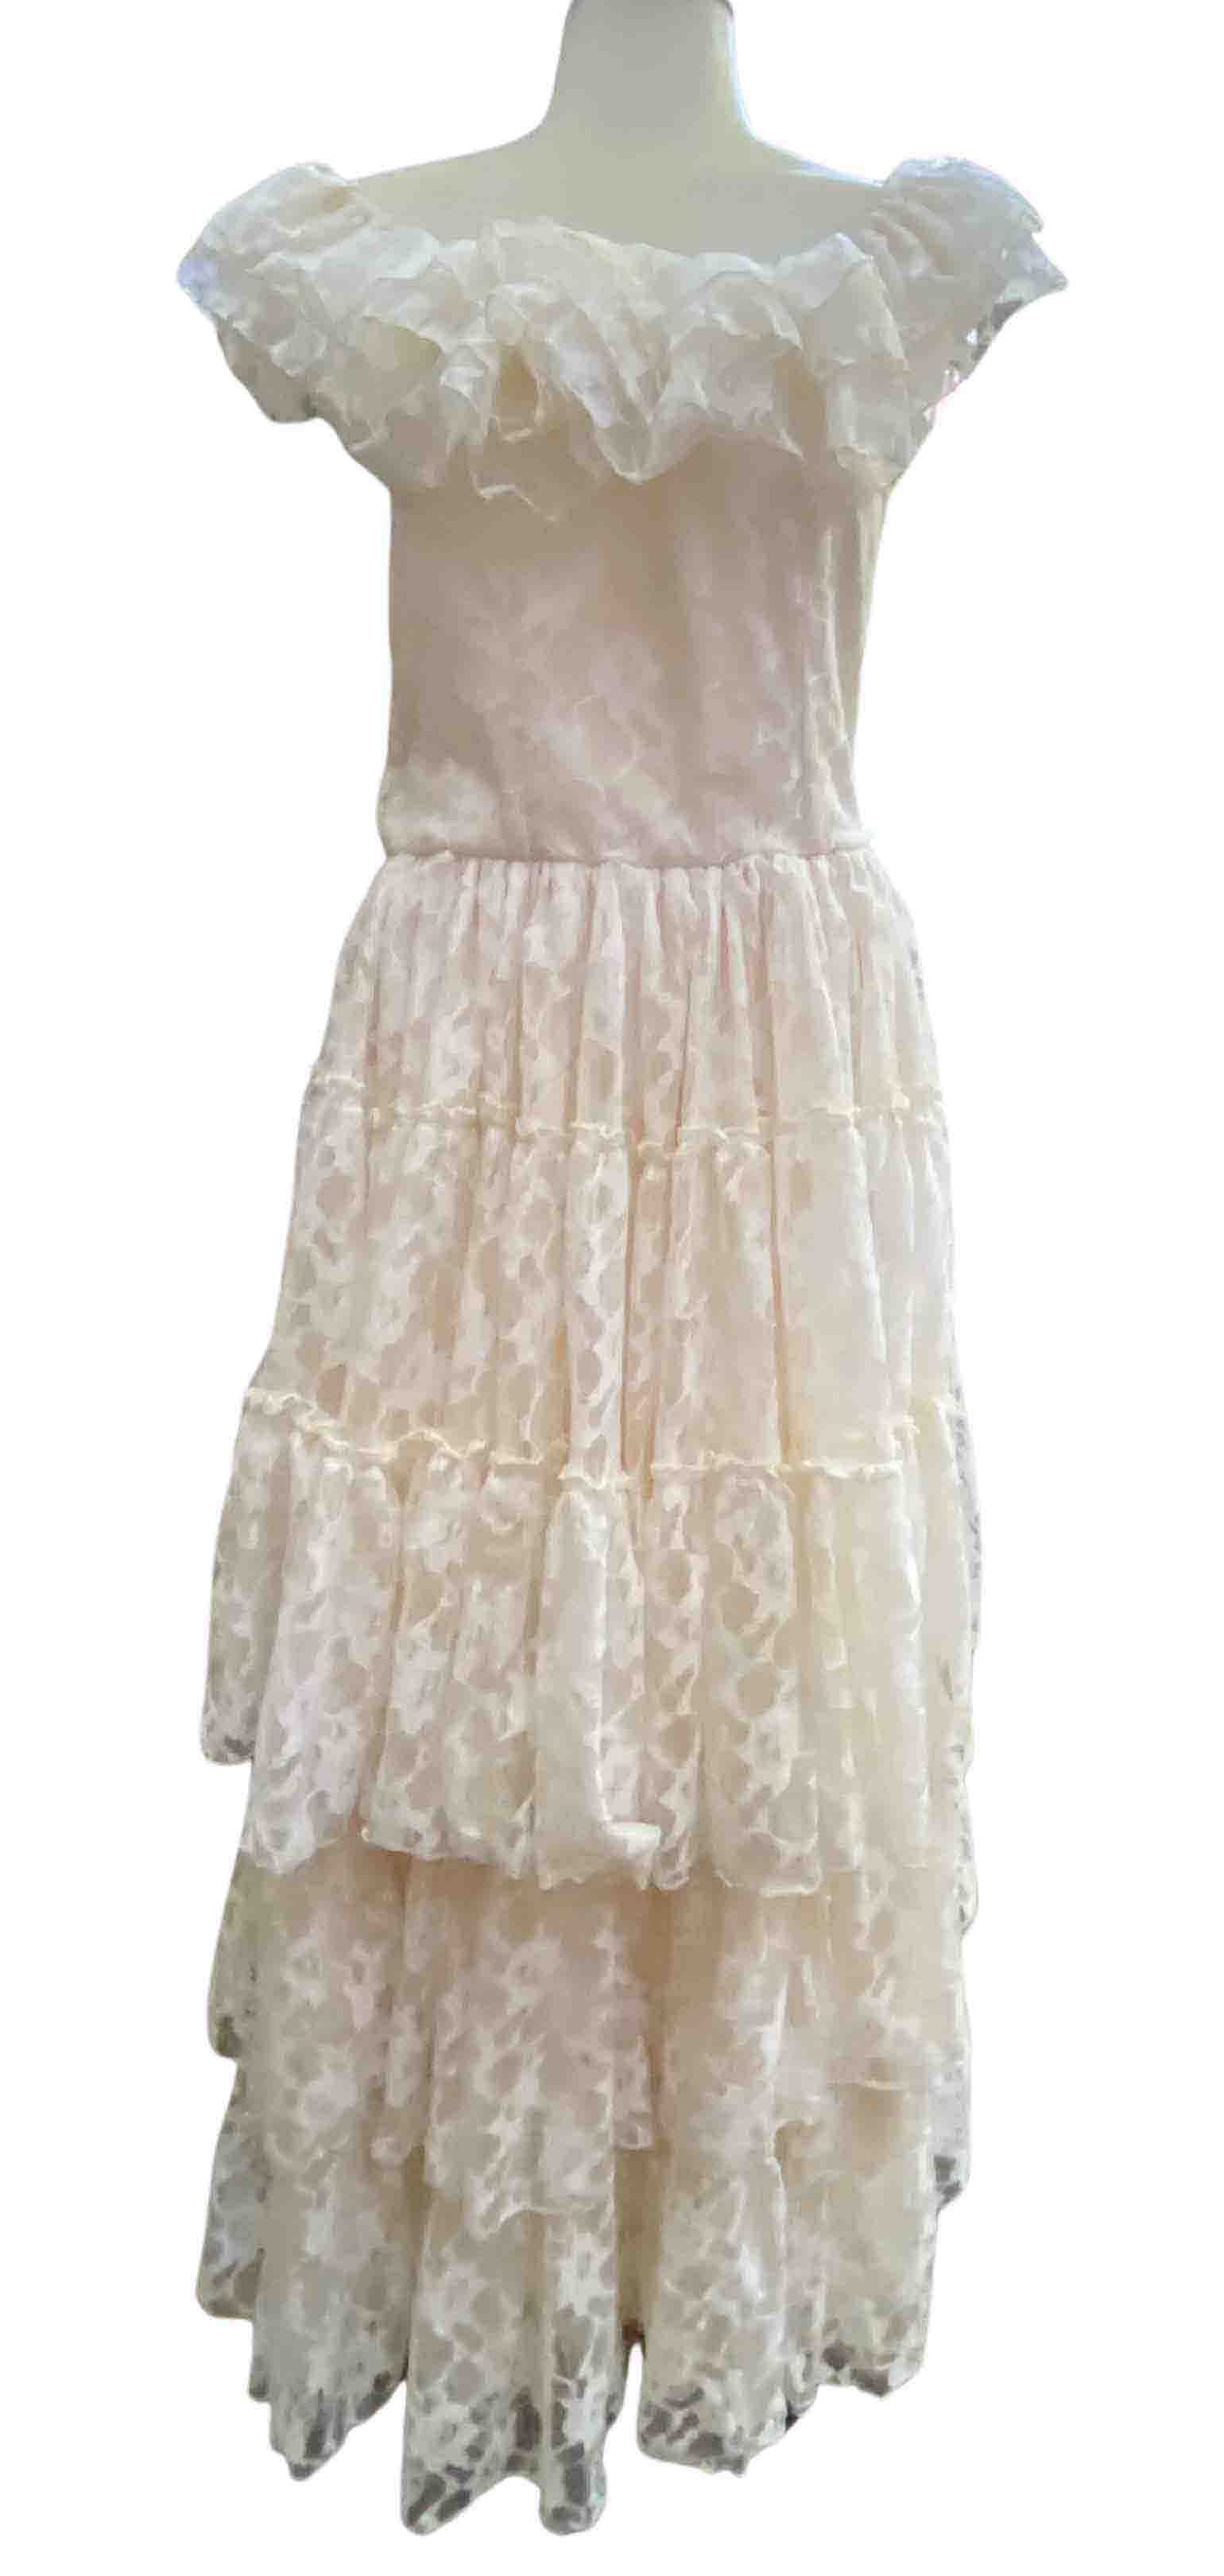 The cream Lace Wednesday Off Shoulder Dress, front view.